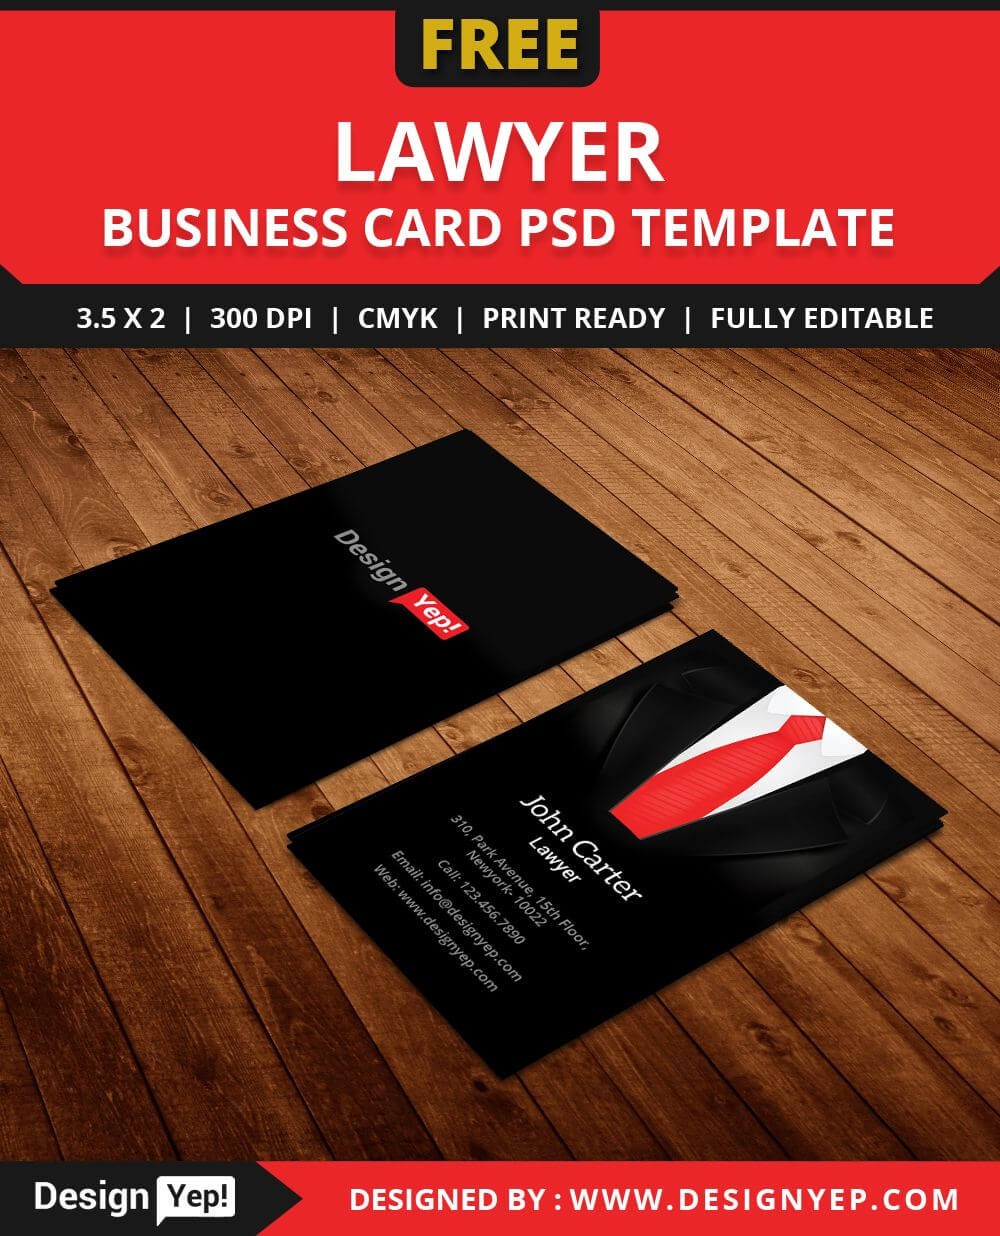 Free Lawyer Business Card Template Psd | Lawyer Business With Regard To Calling Card Free Template